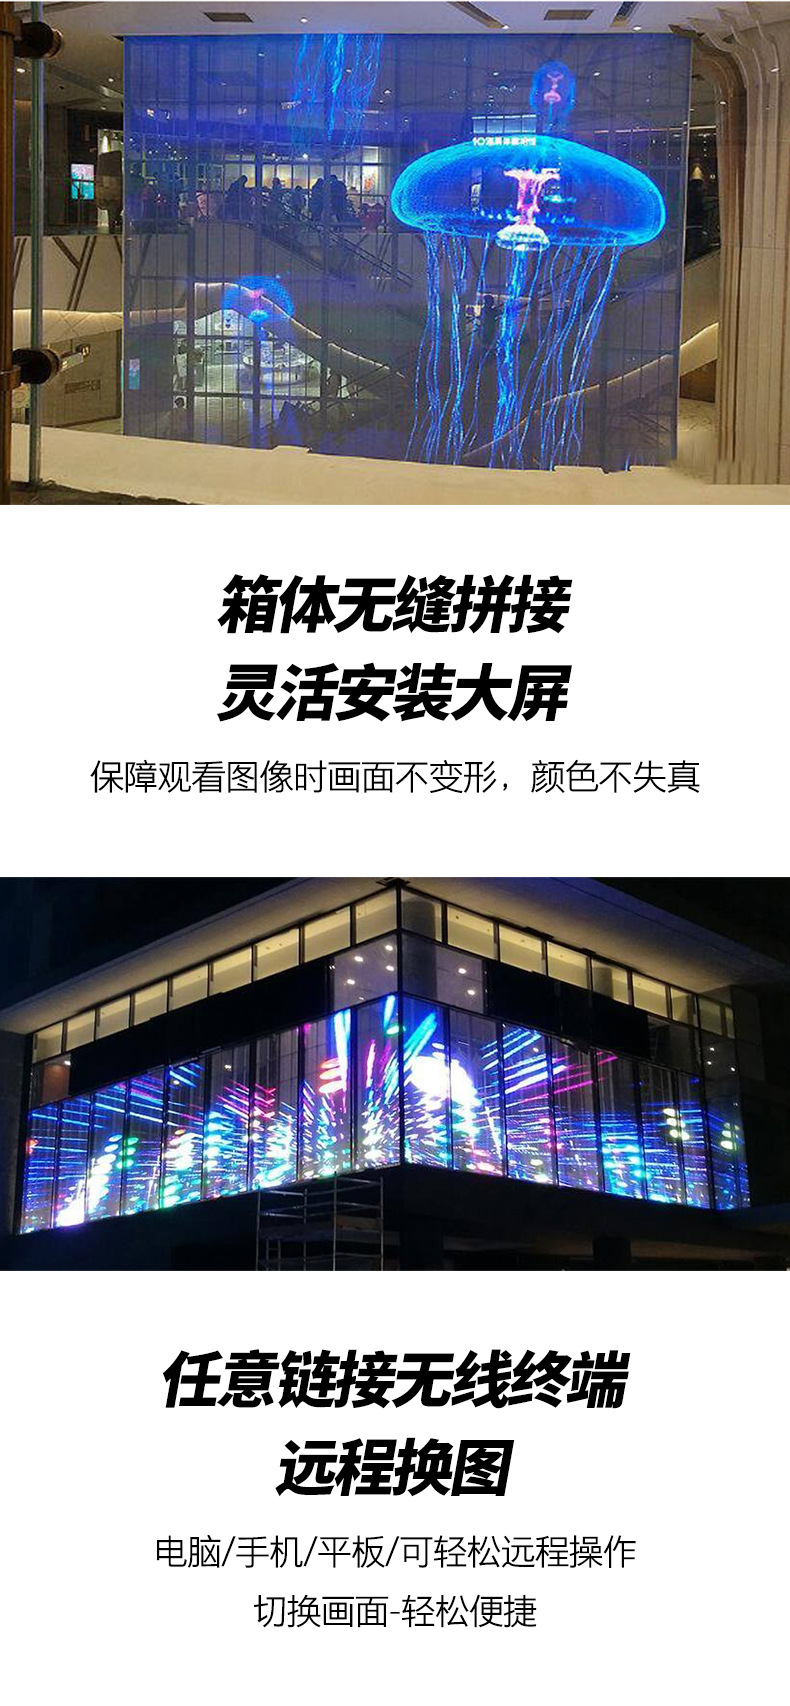 LED transparent screen, ice screen, outdoor glass curtain wall, 3D high-definition screen, transparent advertising display screen